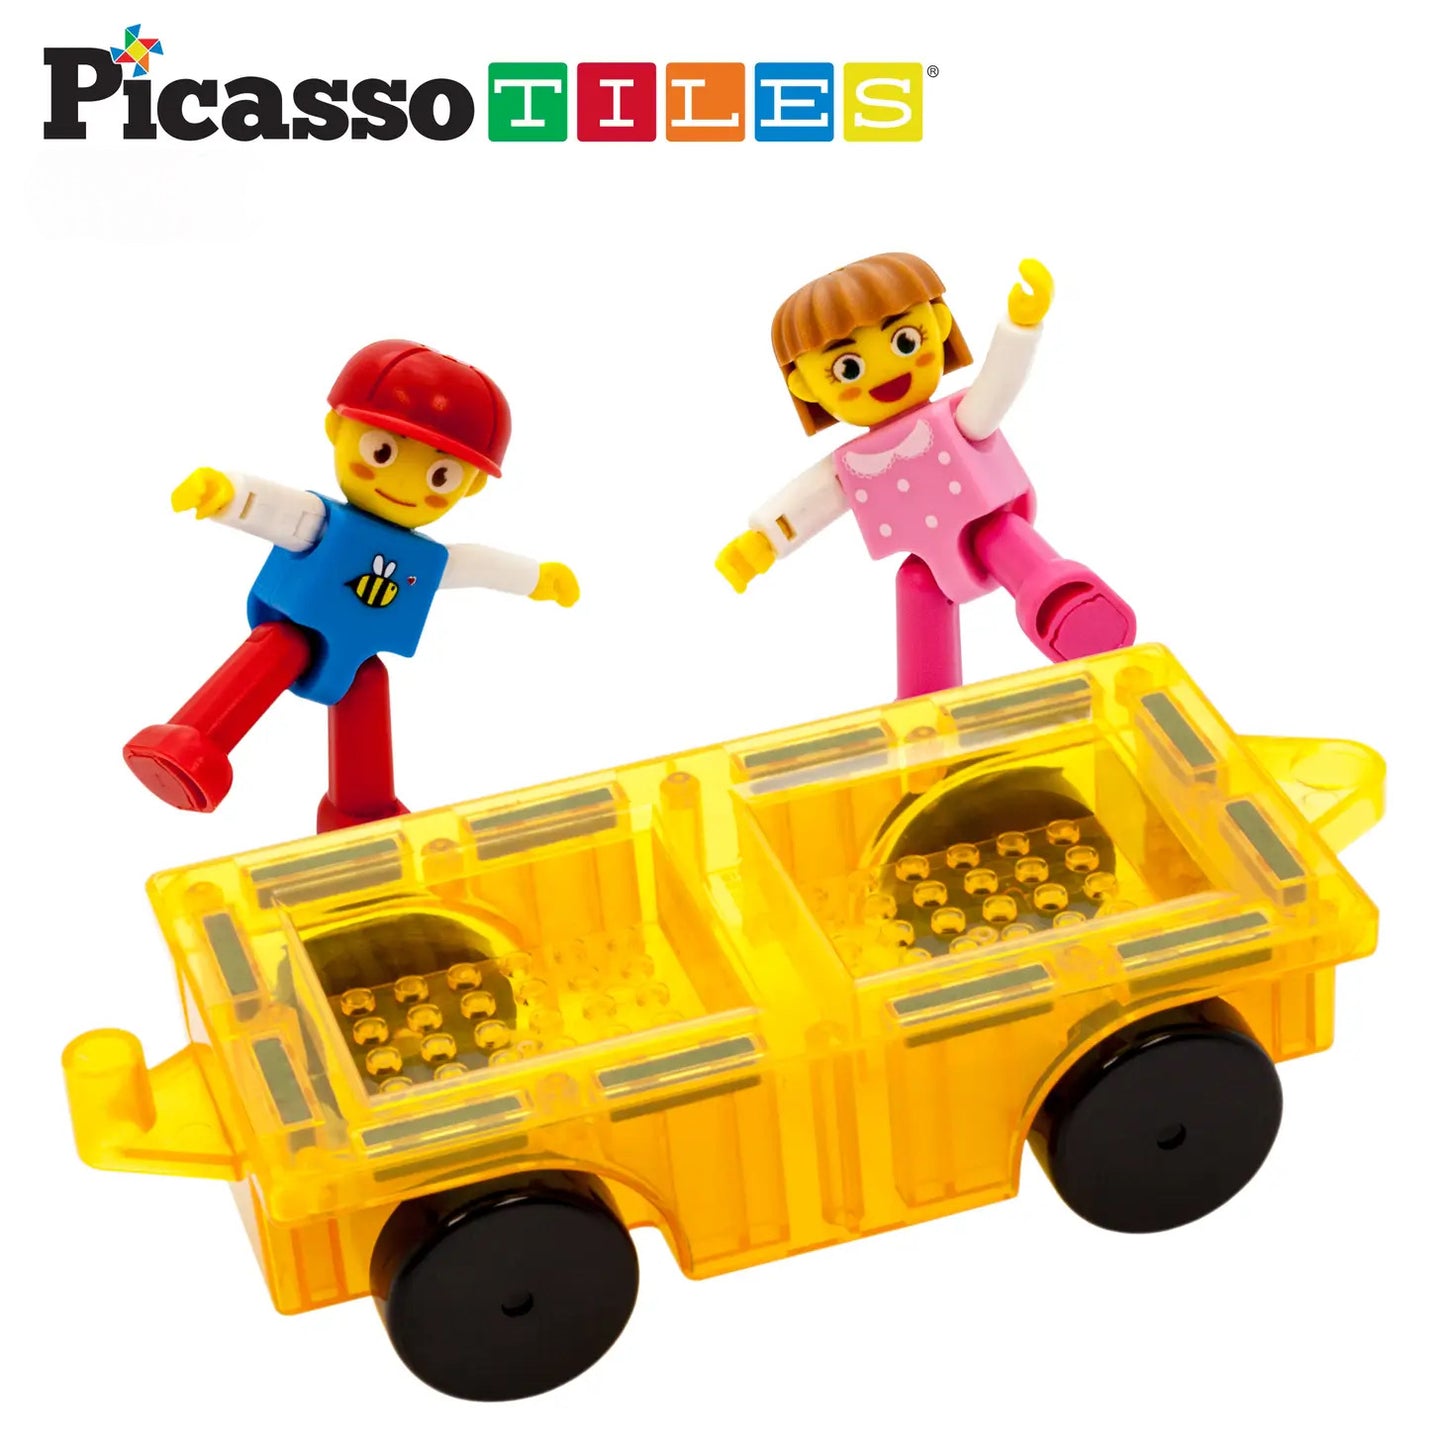 PicassoTiles Car Truck & 2 Characters